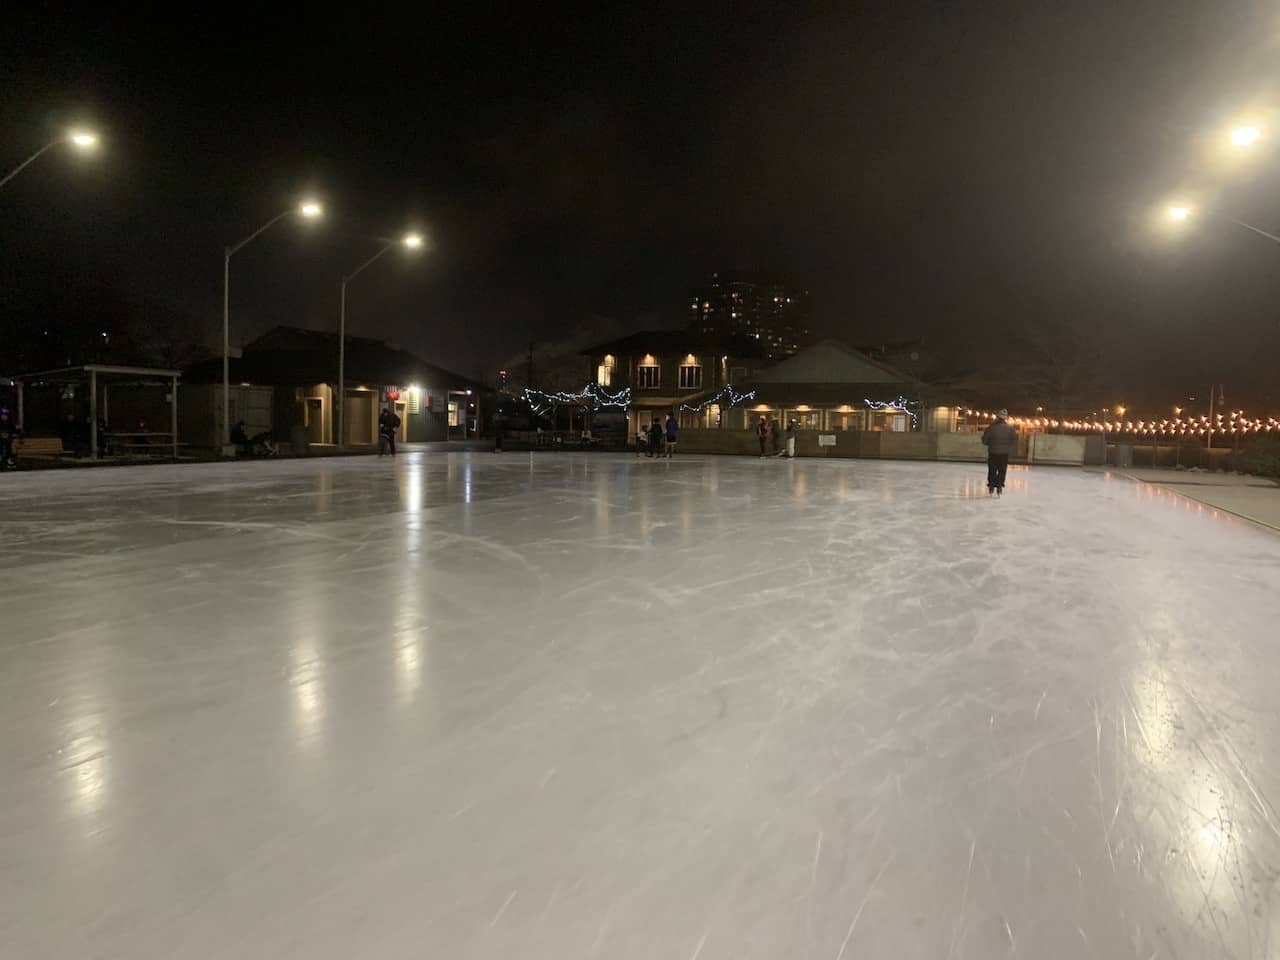 Wide Open Ice at the Outdoor Skating Rink at Pier 8 in Hamilton Ontario - The ice at the Outdoor Skating Rink in Hamilton, Ontario was not very busy on the evening we visited. This picture was taken before the evening skaters had arrived.